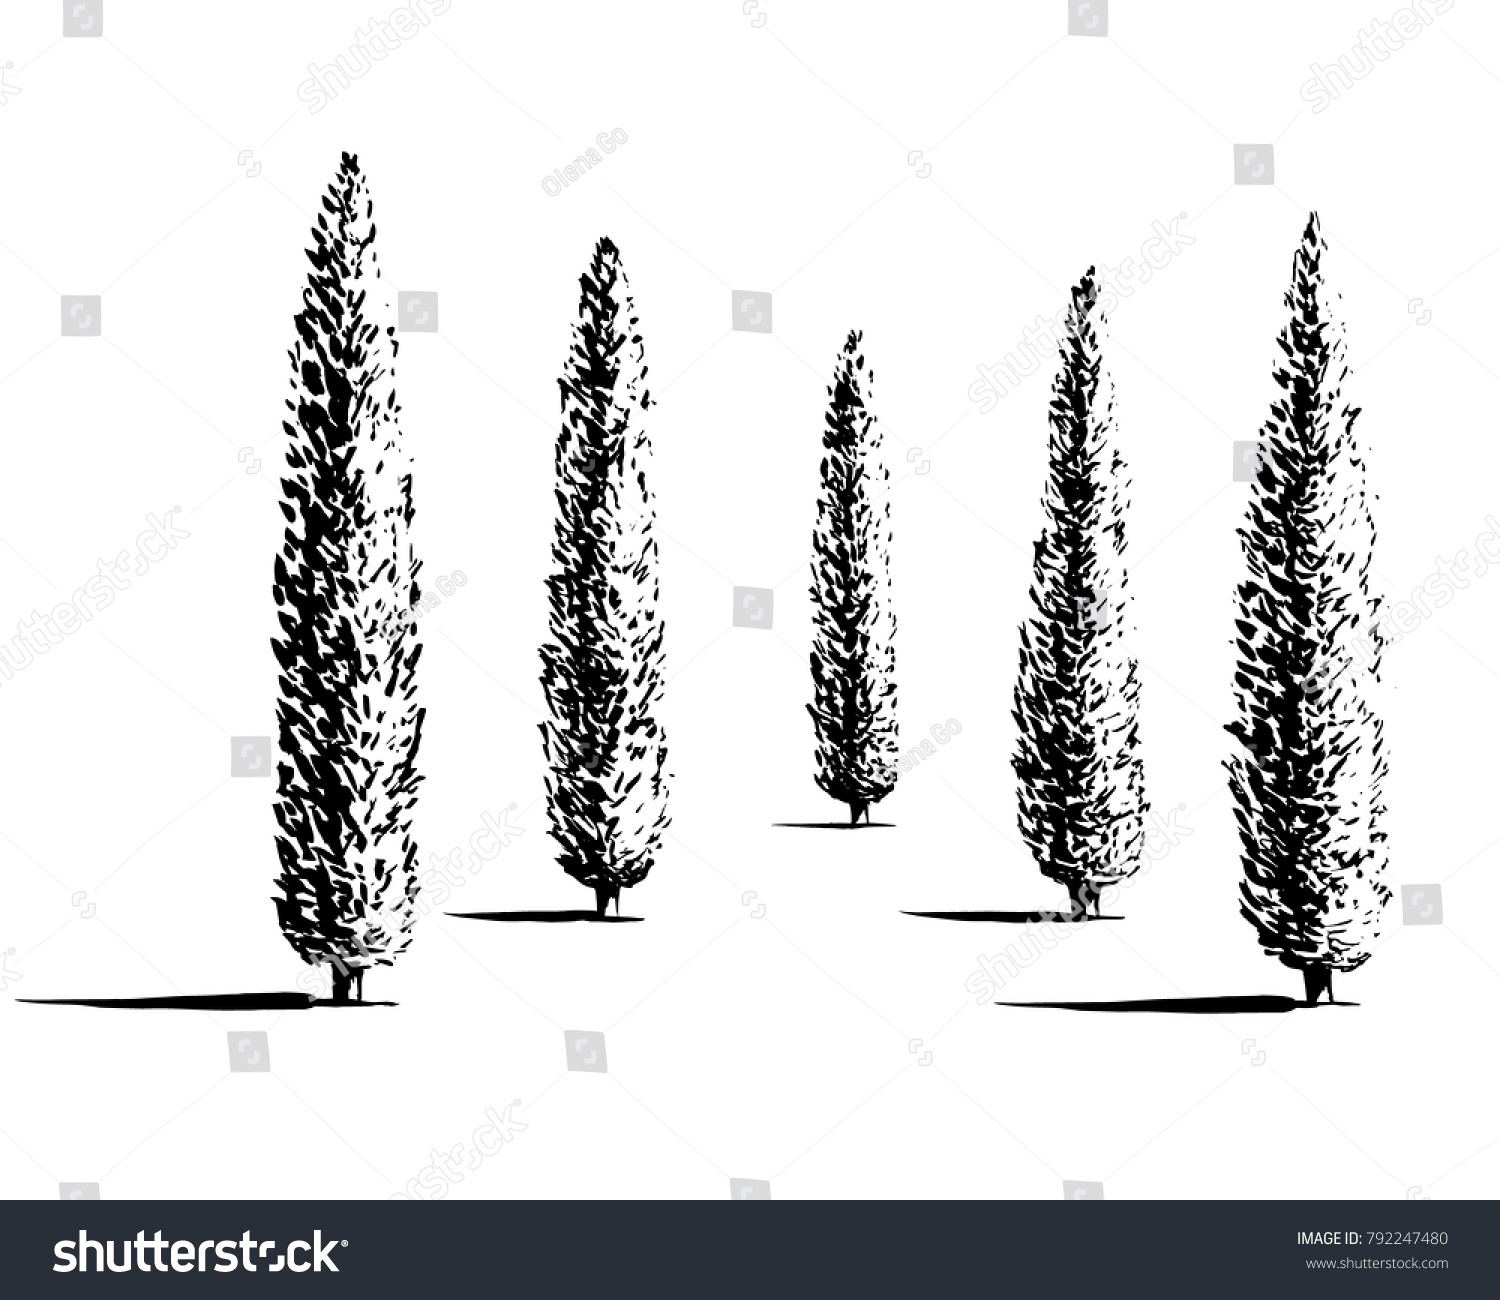 SVG of Set of Mediterranian, Italian or Tuscan cypresses illustration. Valley of trees of different sizes. Black sihlouette of coniferous evergreen Pencil pine isolated on white background. svg